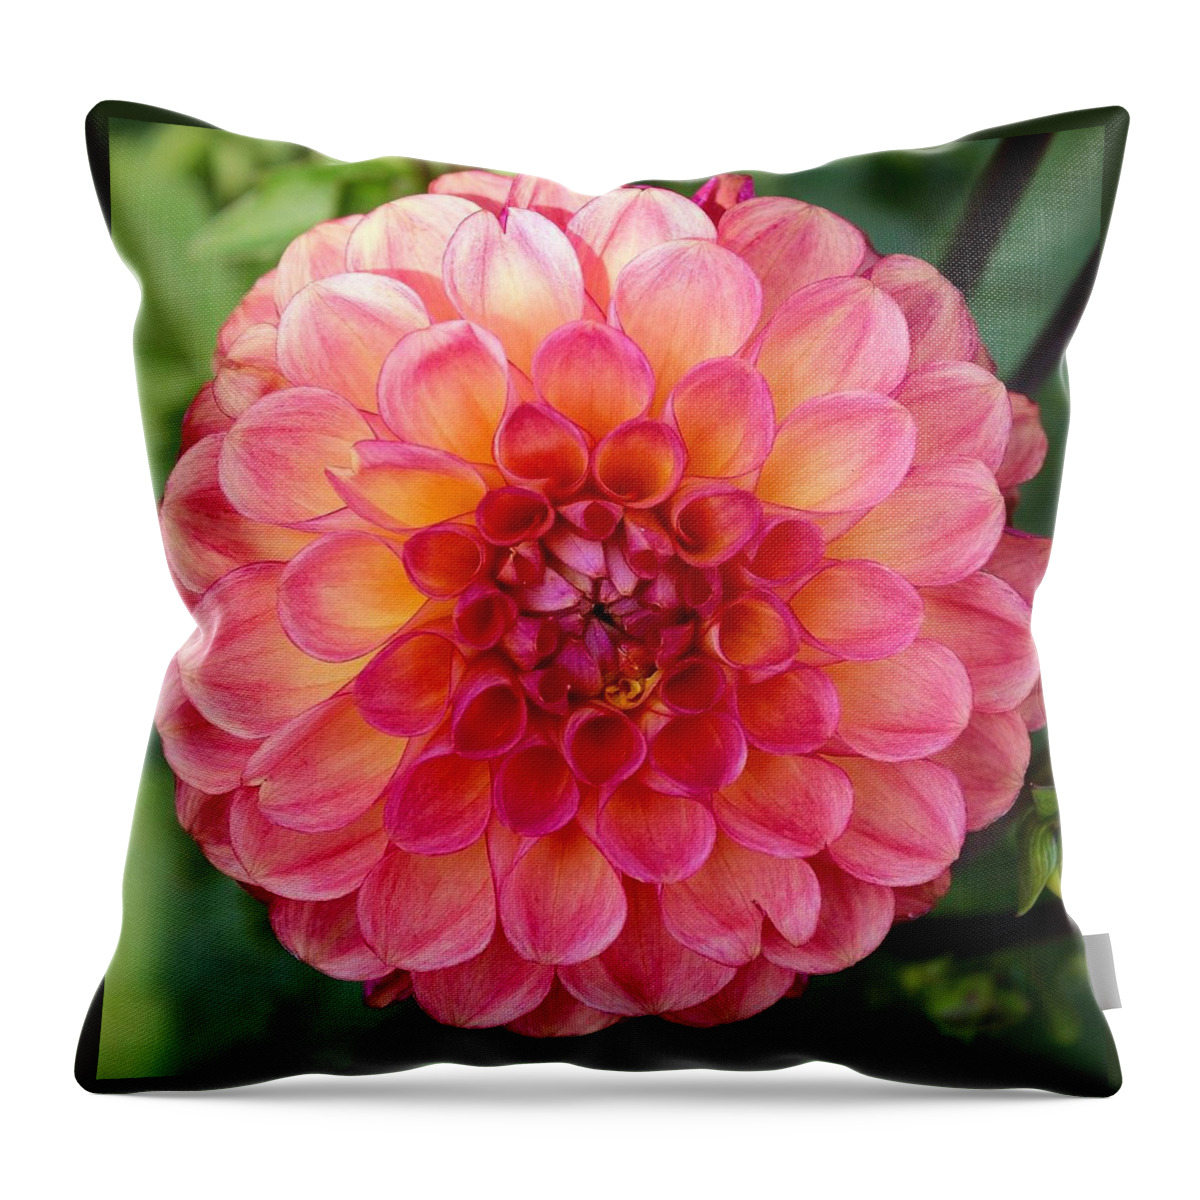 This Beautiful Pink Dahlia Was Captured At The Swan Island Dahlia Farm In Canby Throw Pillow featuring the photograph Pink Dahlia by Brian Eberly